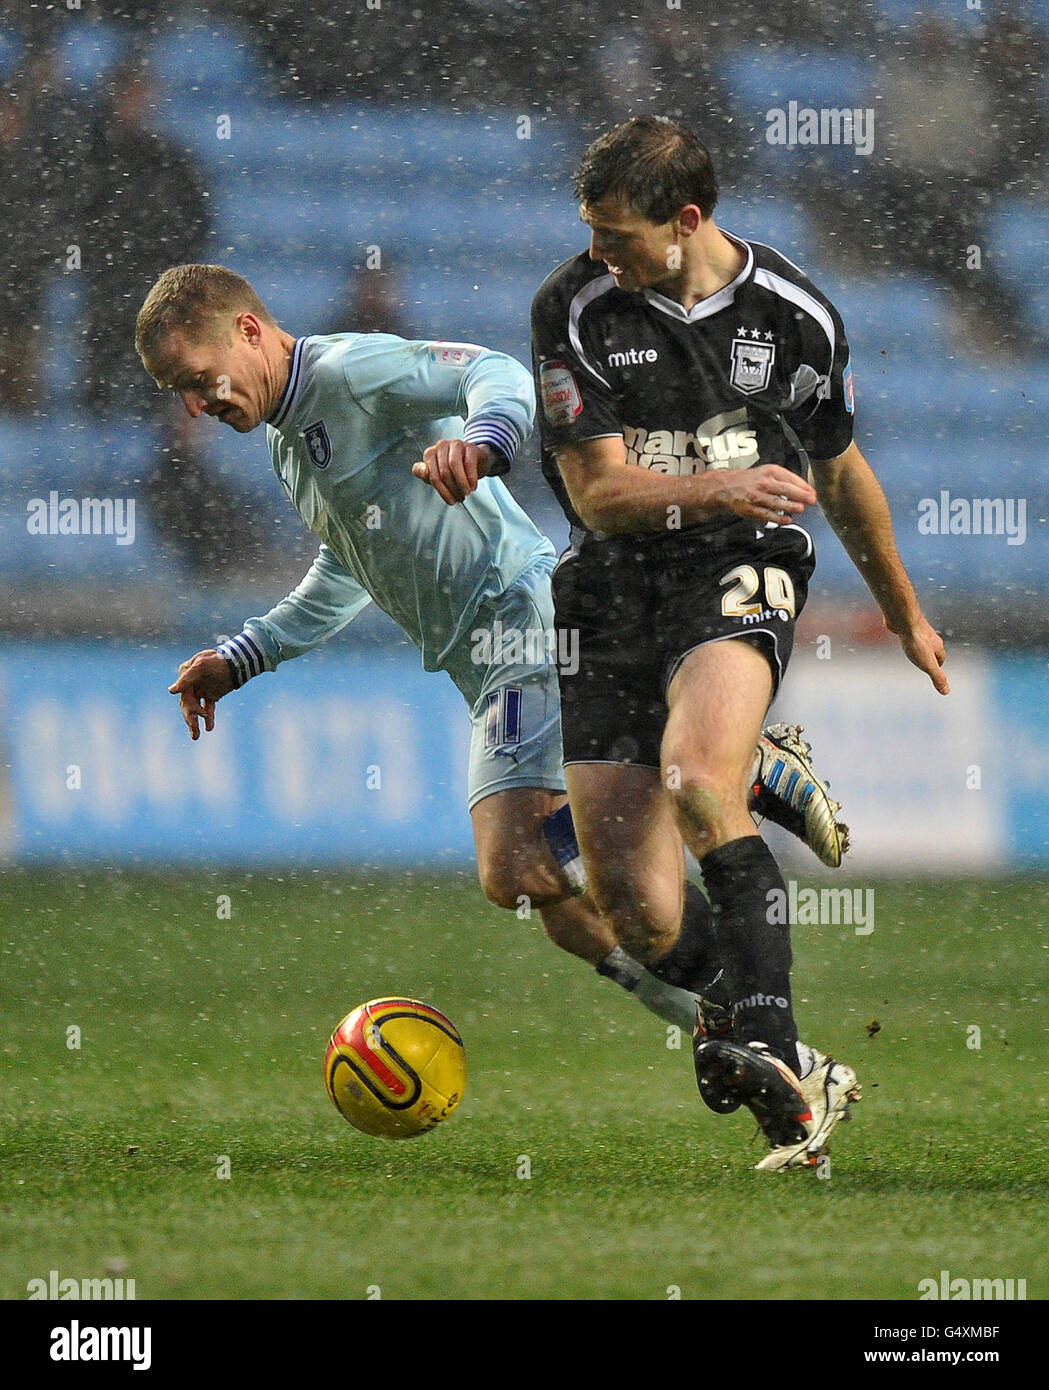 Coventry City's Gary McSheffrey and Ipswich Town's Tommy Smith battle for the ball during the npower Football League League Championship match at the Ricoh Arena, Coventry. Stock Photo